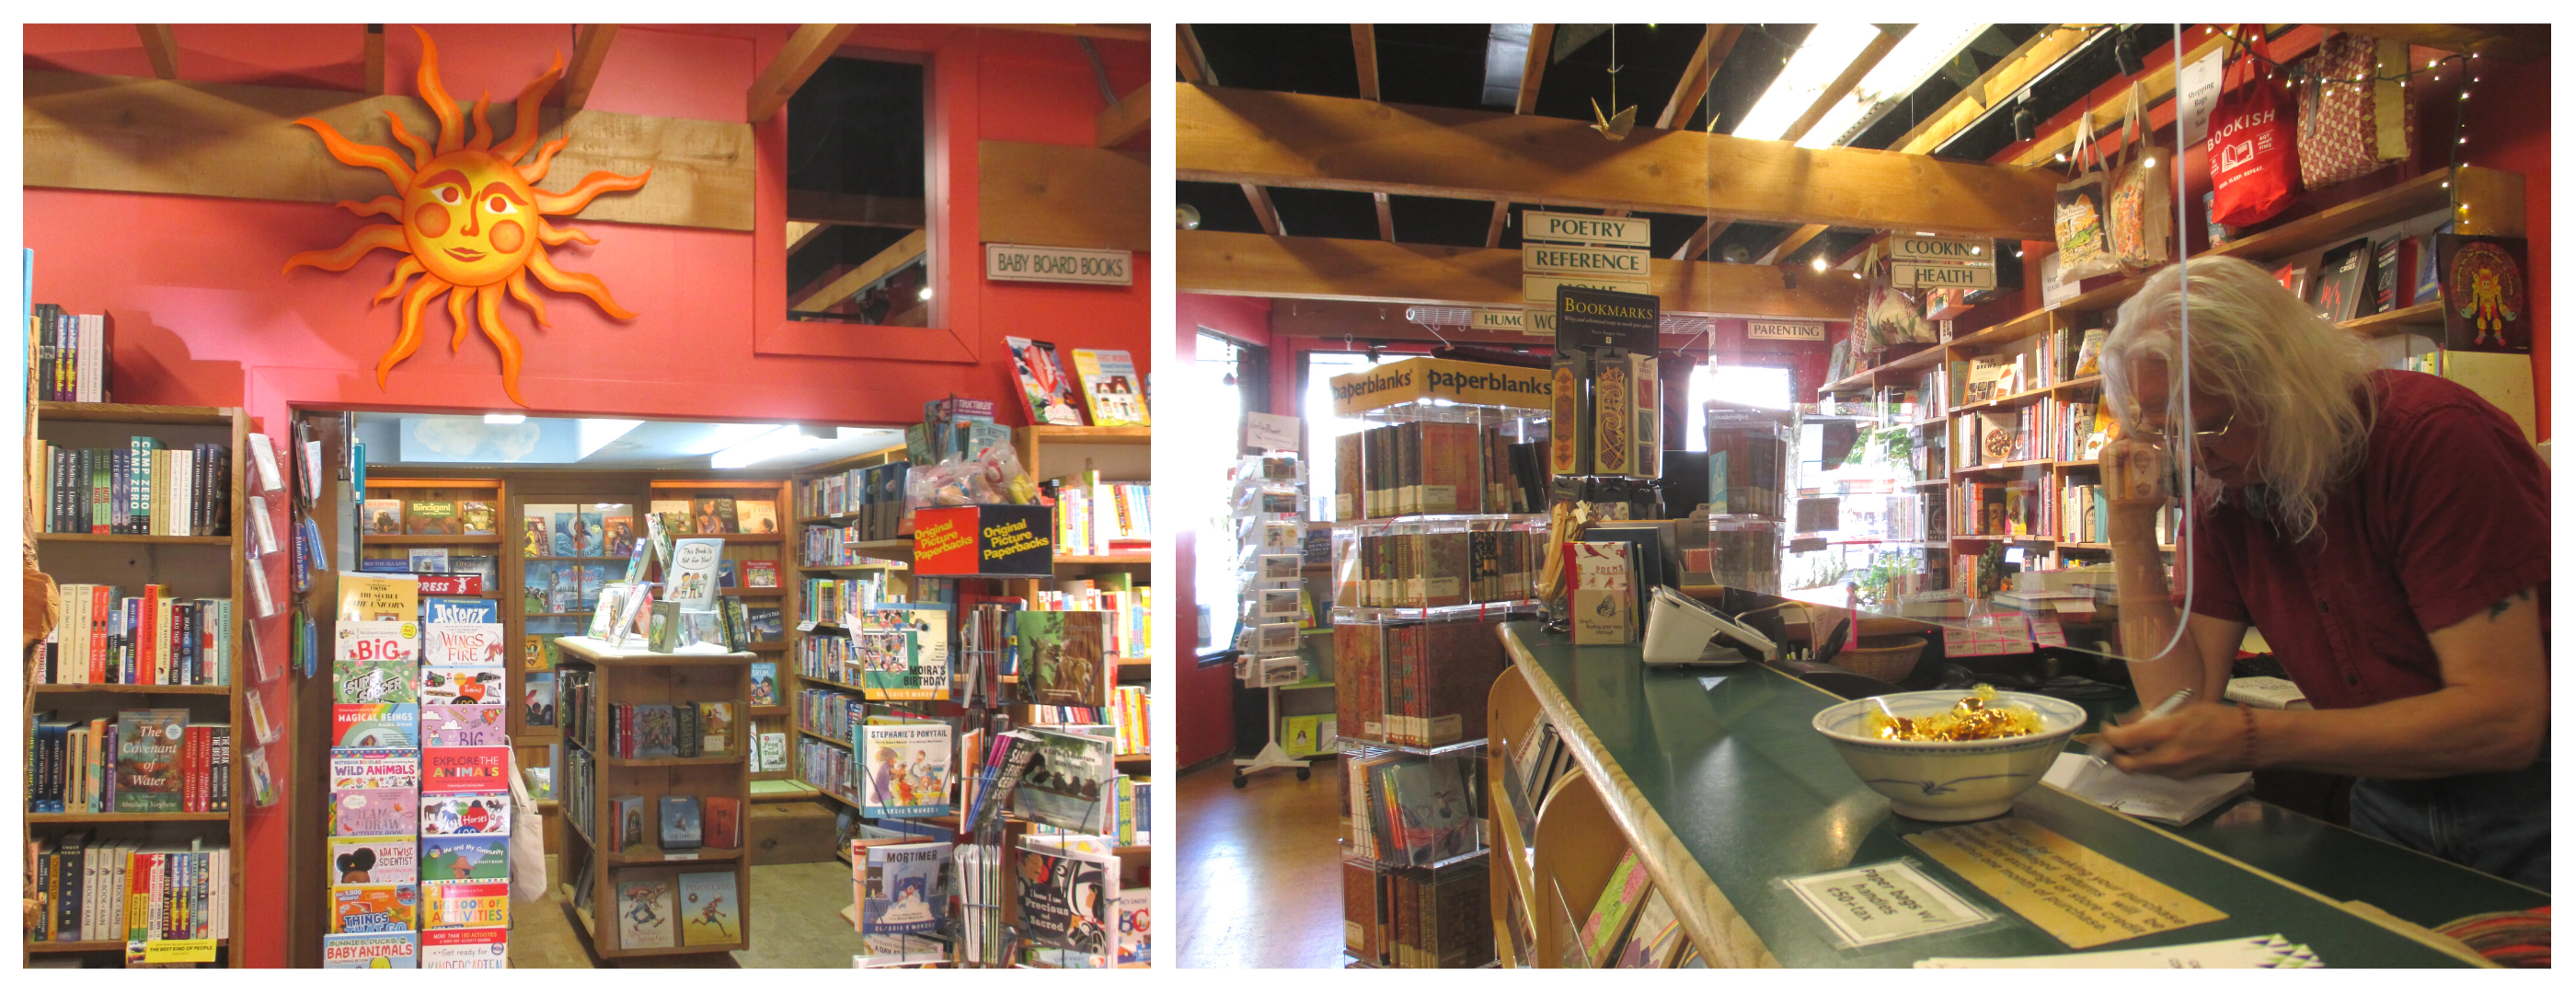 Photos of the interior of Laughing Oyster Bookshop including shelves and a person making notes at the cash.